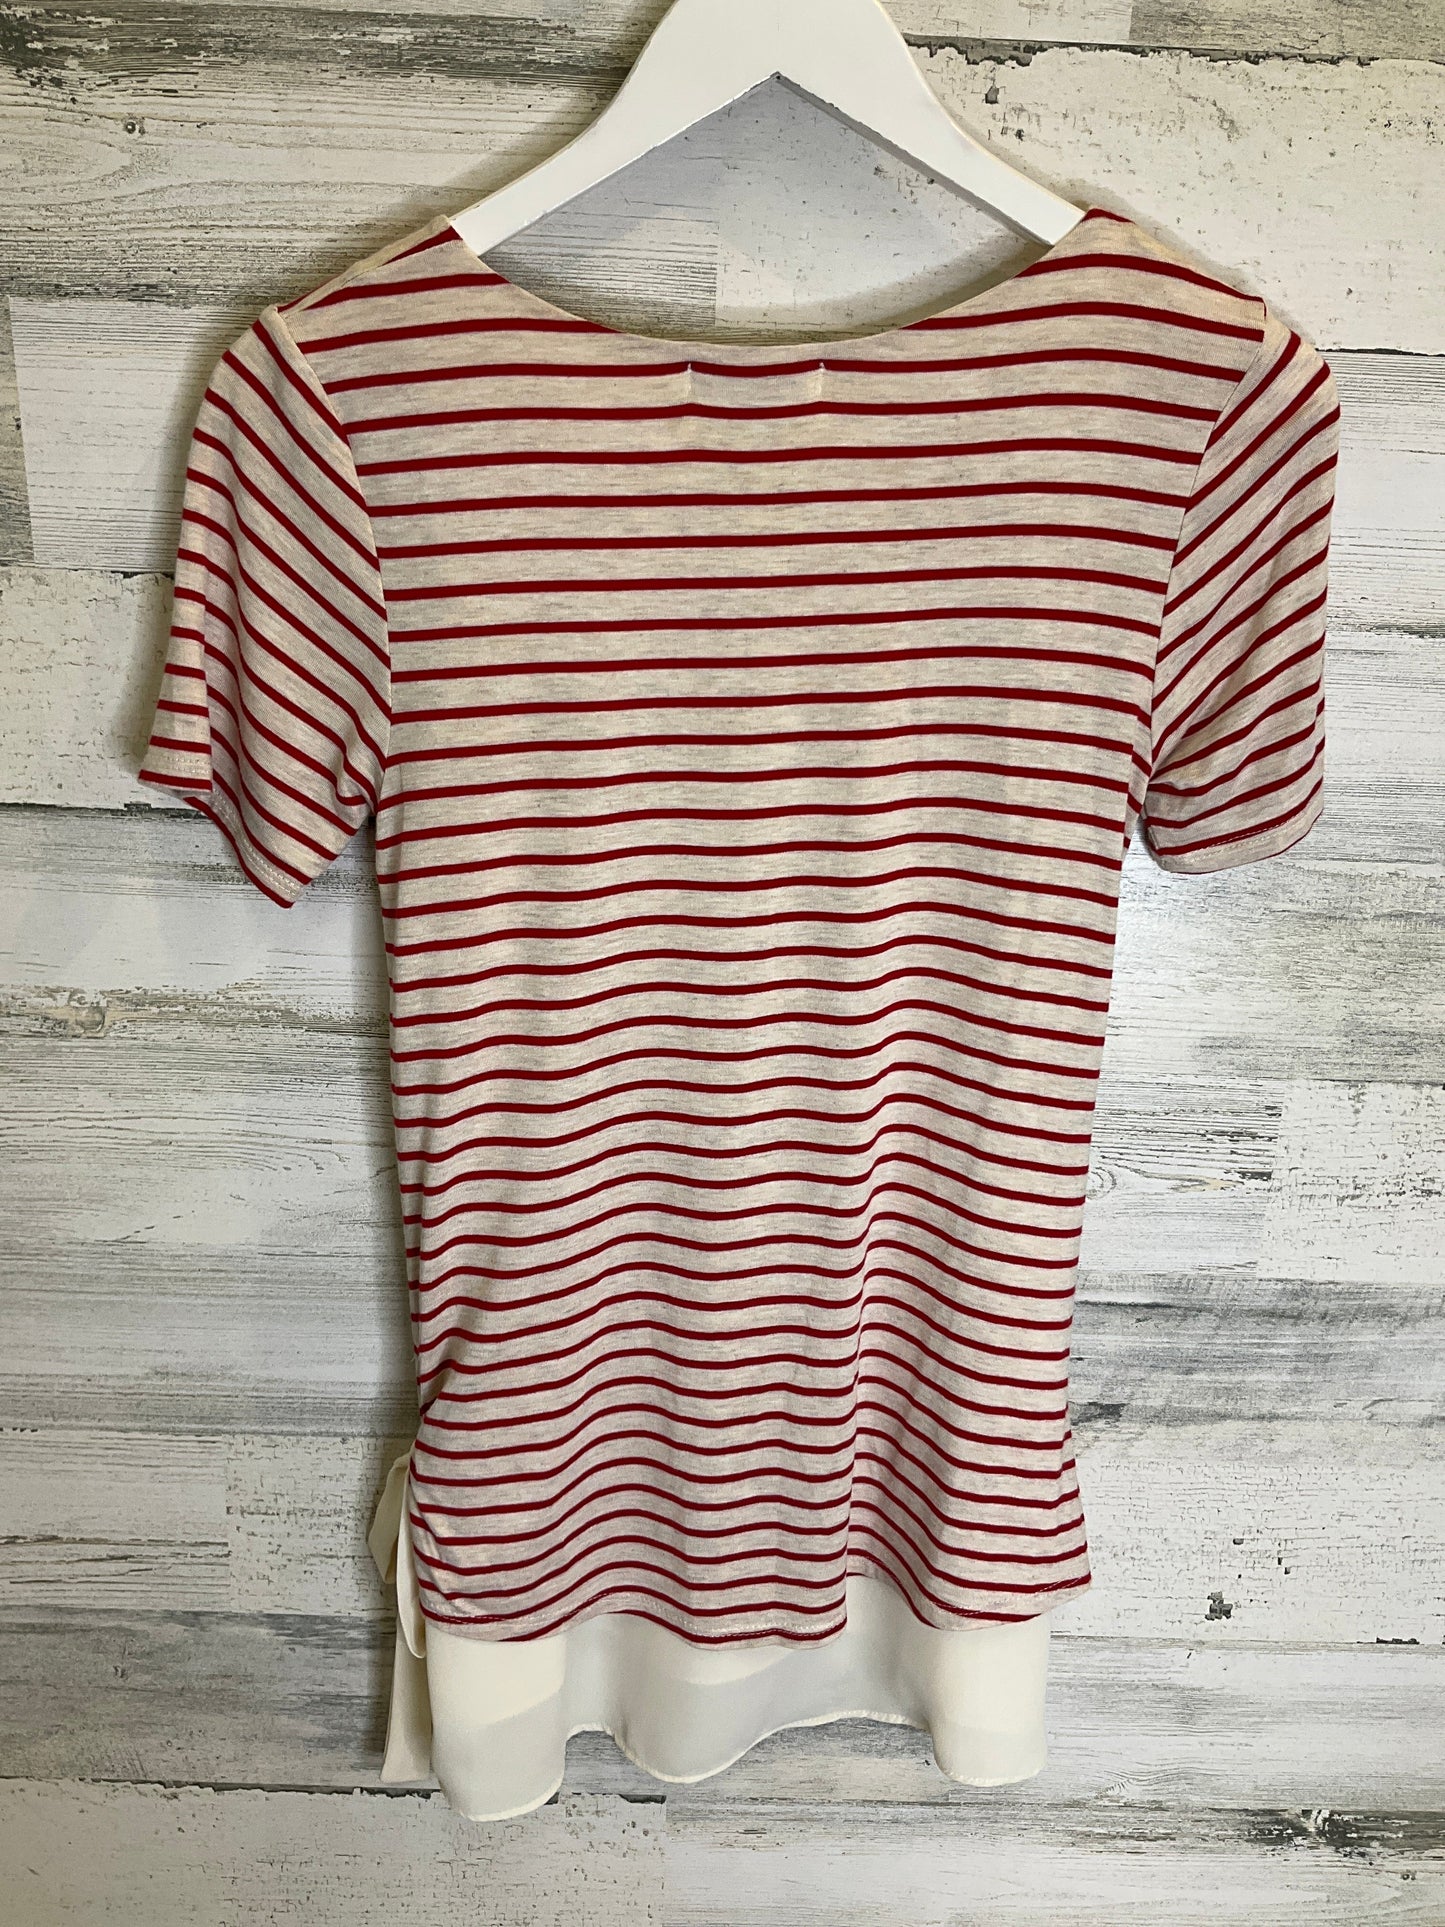 Red & Tan Top Short Sleeve Moa Moa, Size S